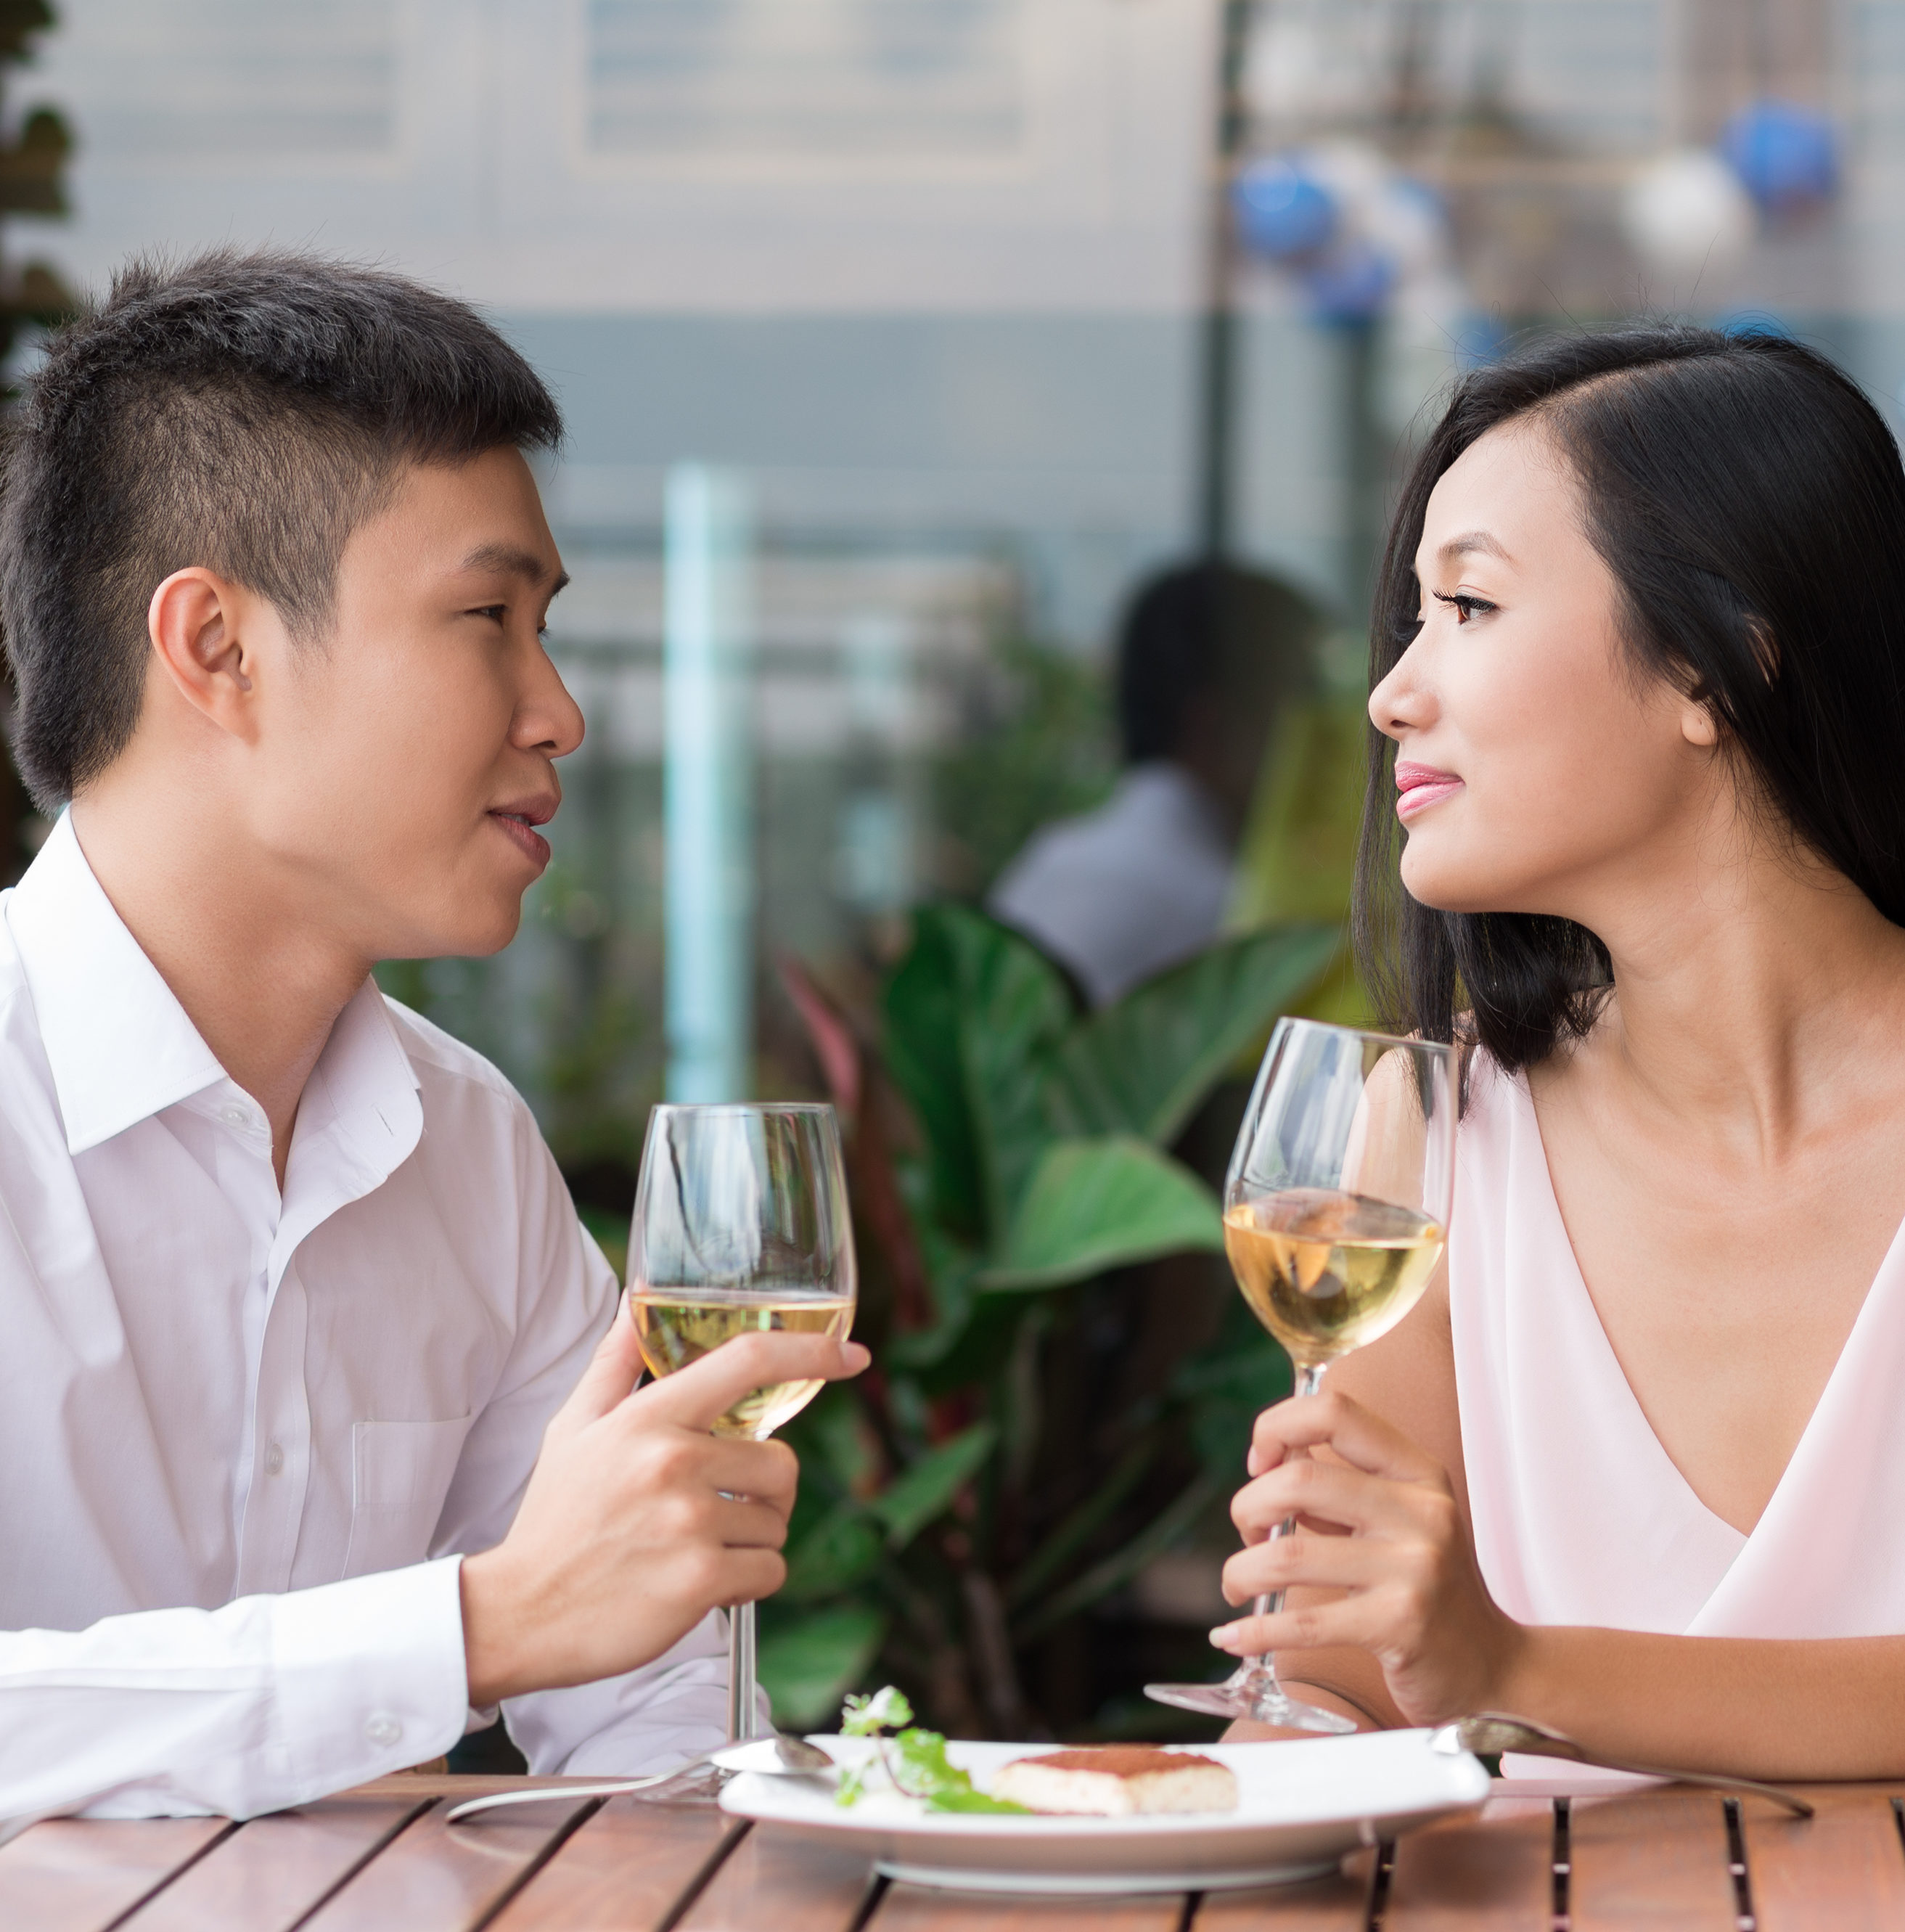 shutterstock 177291362 e1498552941981 - China: is it time for white wine?